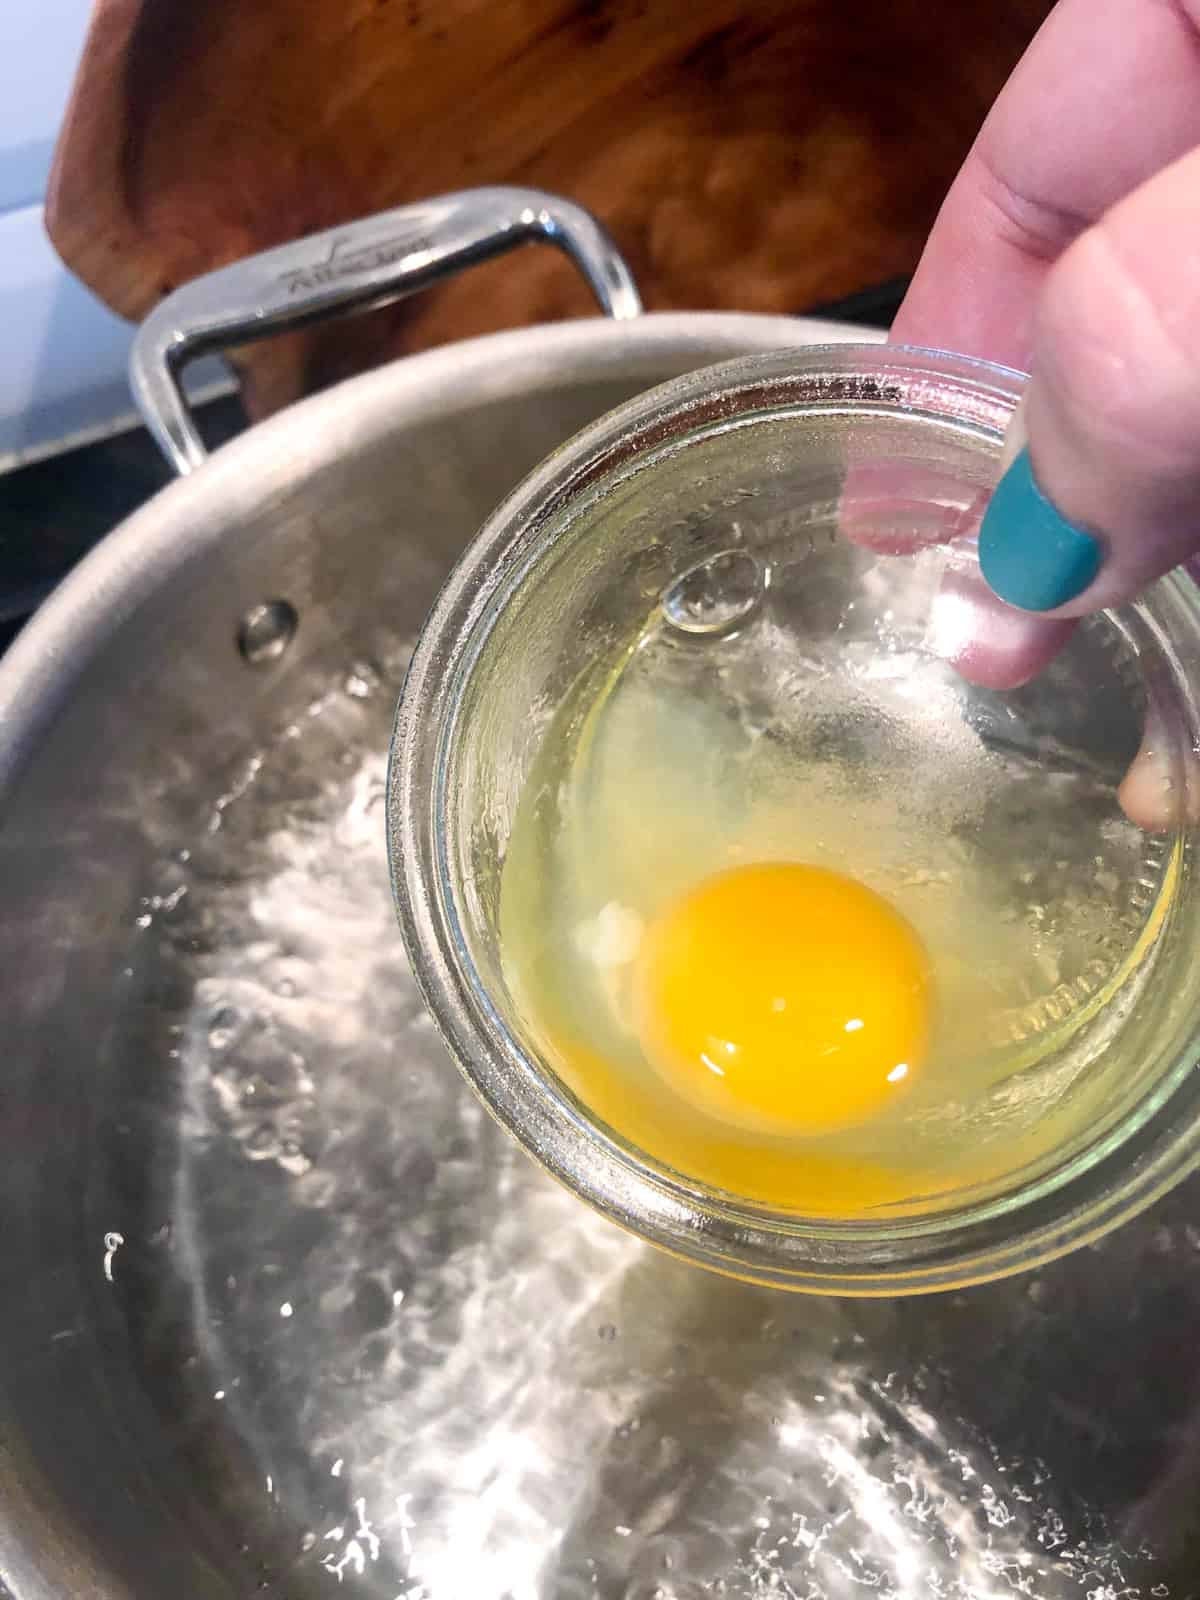 Add the egg into a small bowl and slide the egg into the water, keeping the bowl as close to the water as possible allowing the egg to go in all at once.